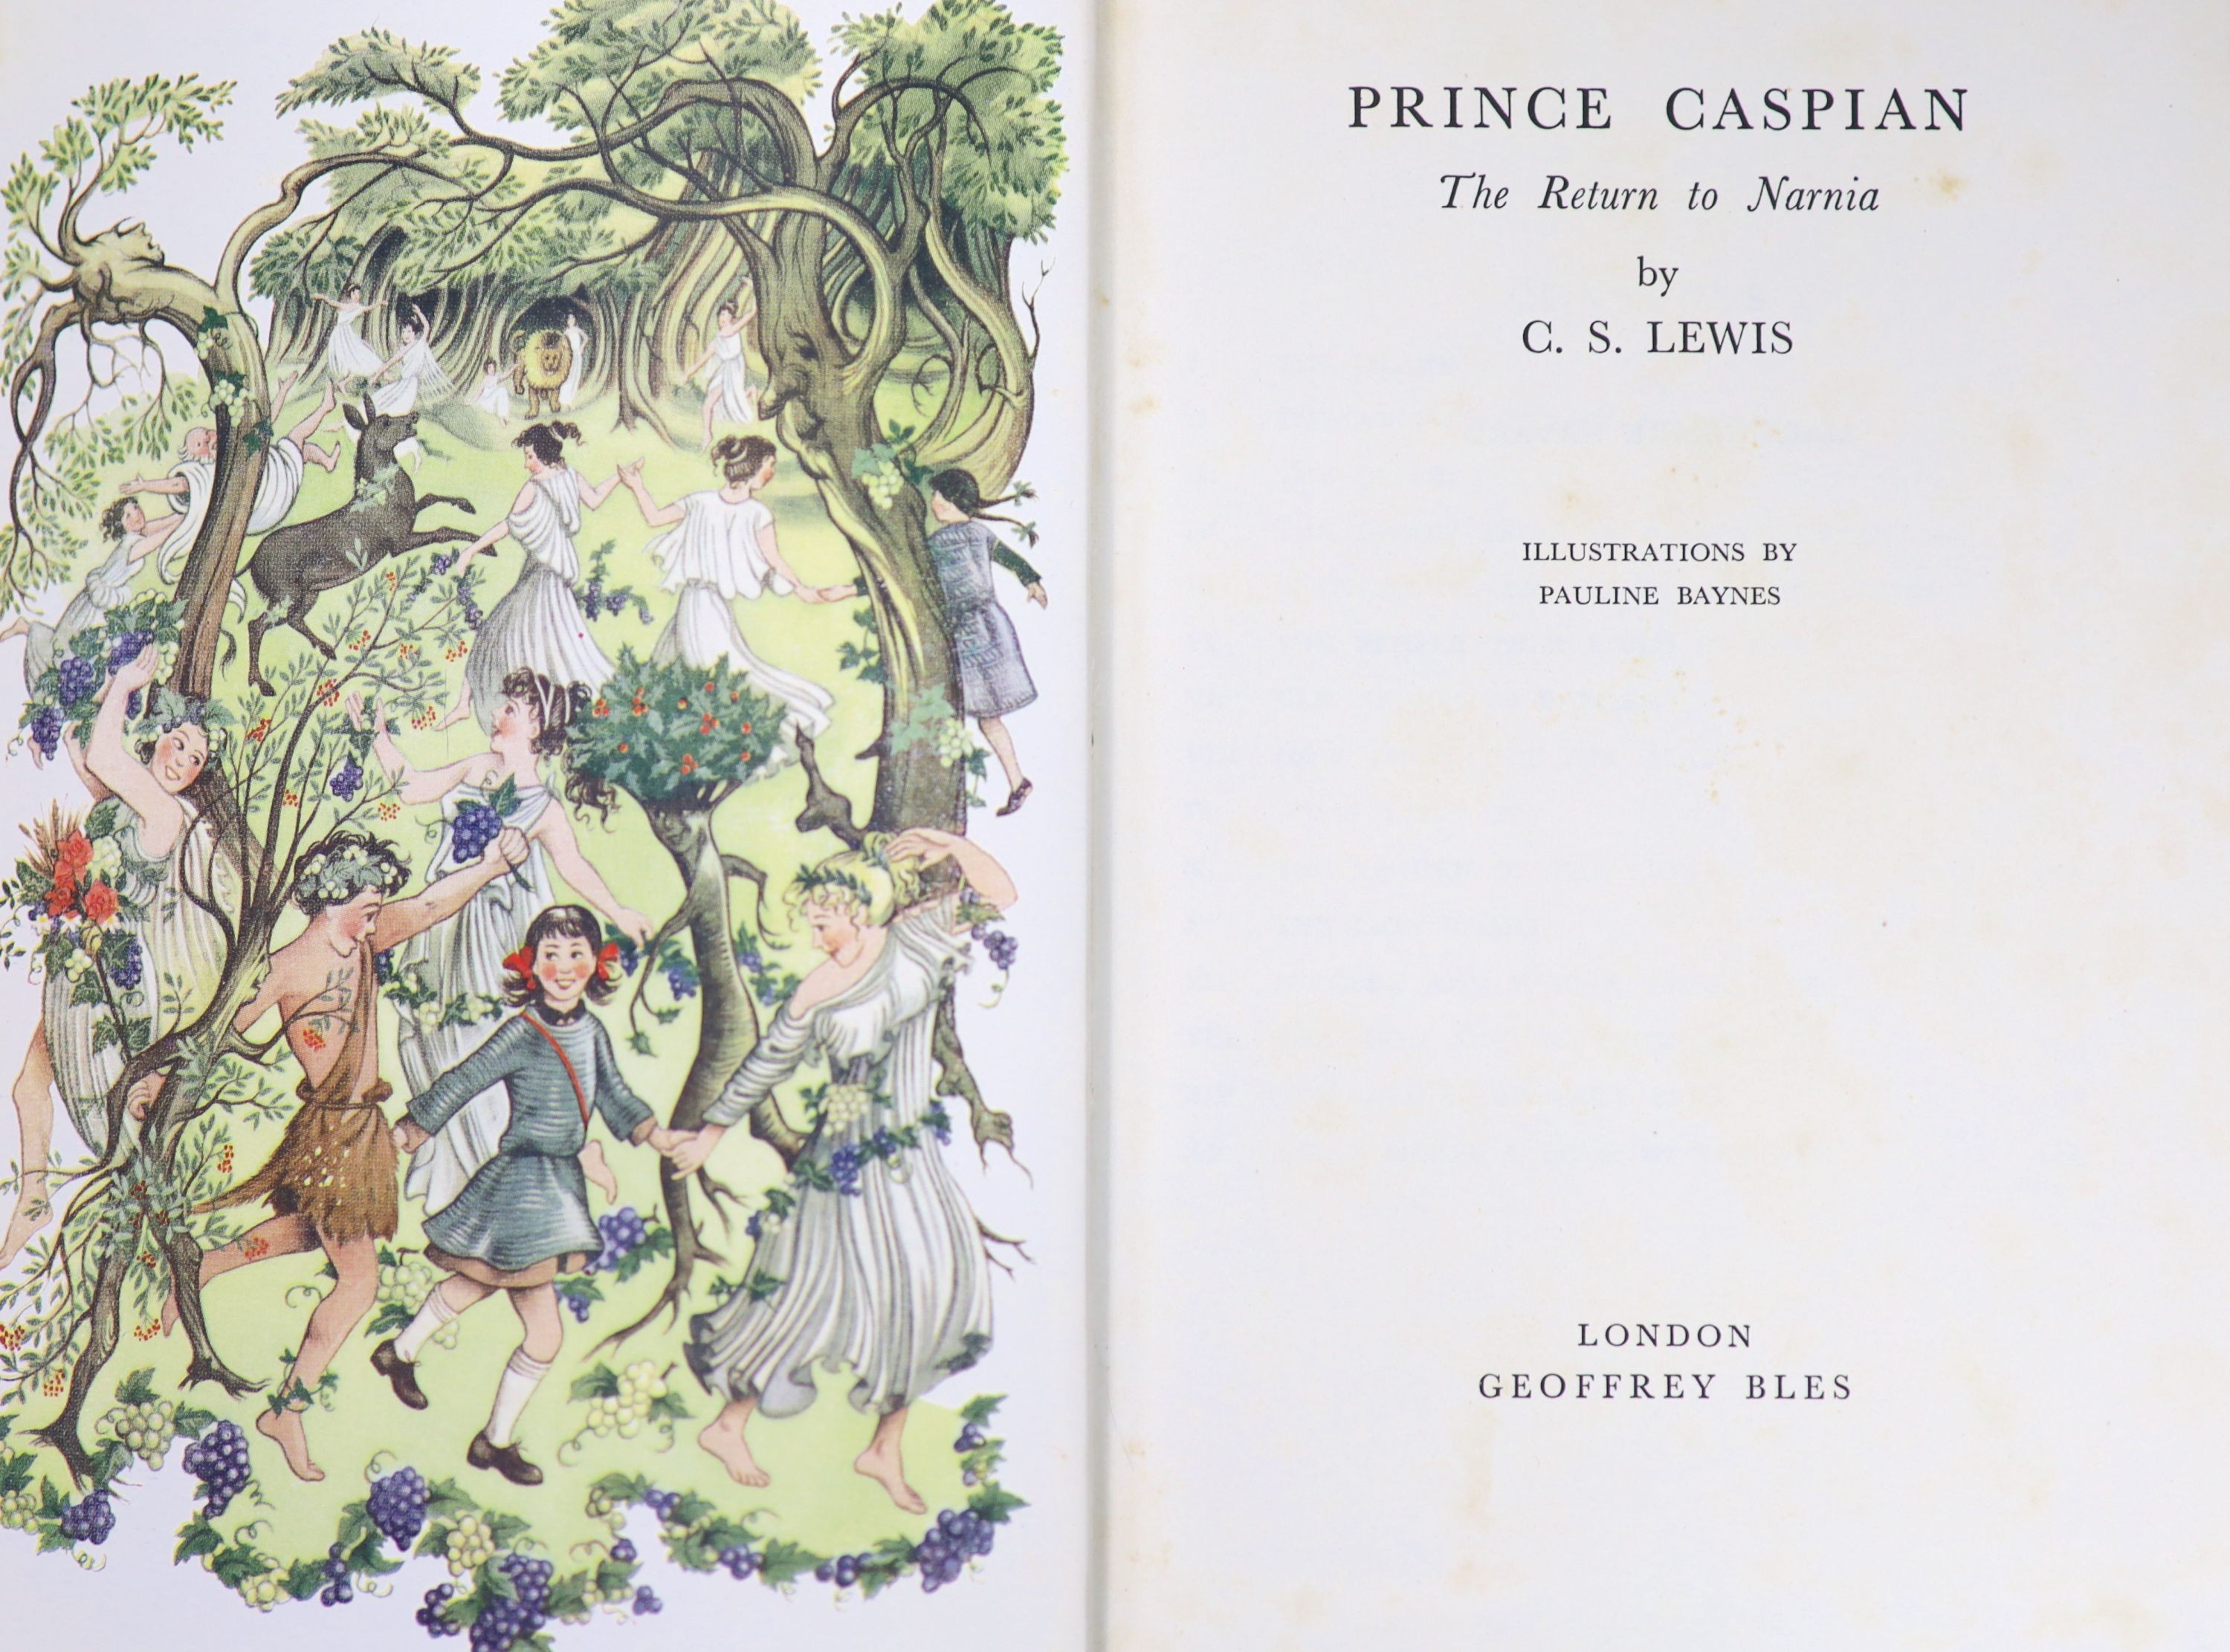 Lewis, Clive Staples - Prince Caspian. The Return to Narnia, 1st edition, 8vo, illustrated by Pauline Baynes, including a coloured frontis, original cloth, in unclipped d/j, Geoffrey Bles, London, 1951